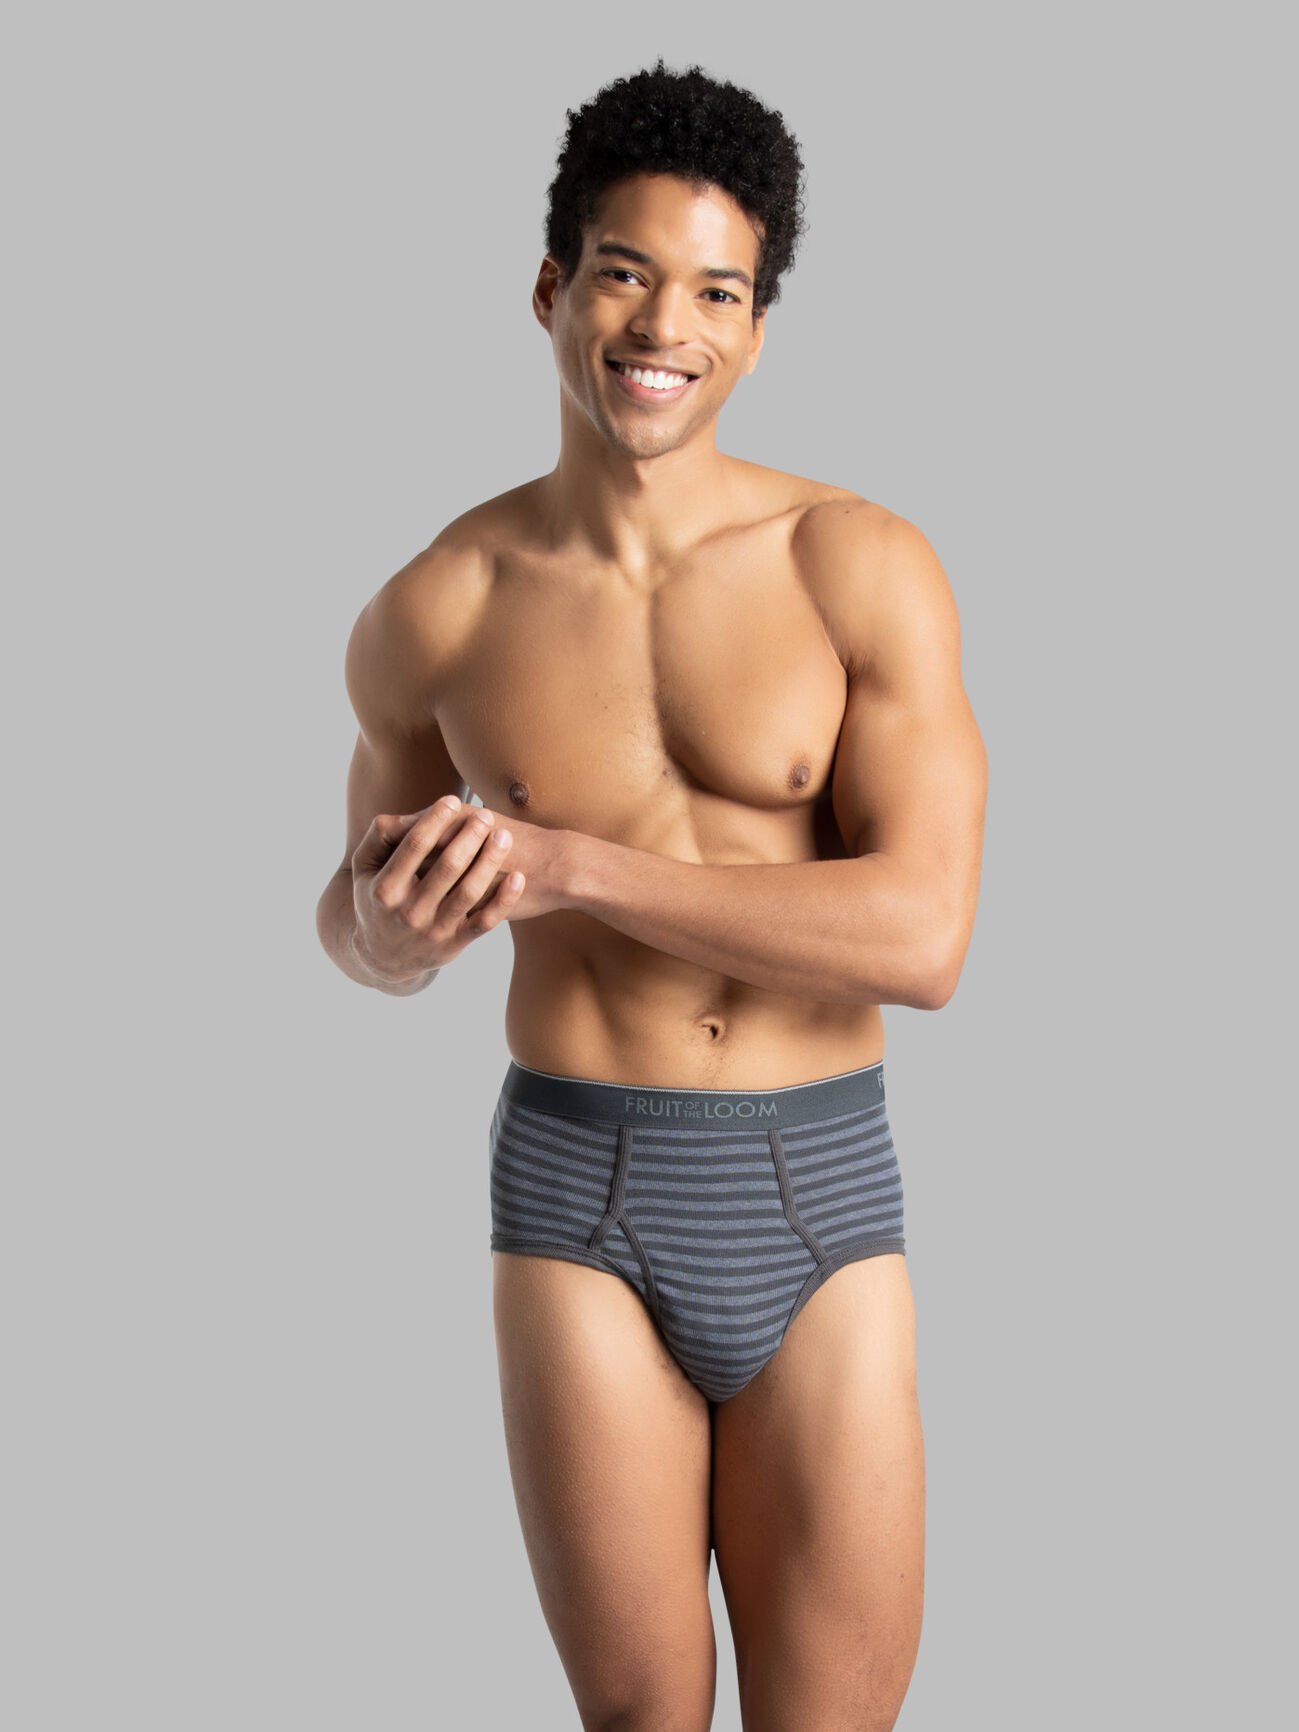 Men's Fashion Briefs, Assorted Stripe and Solid 6 Pack Assorted